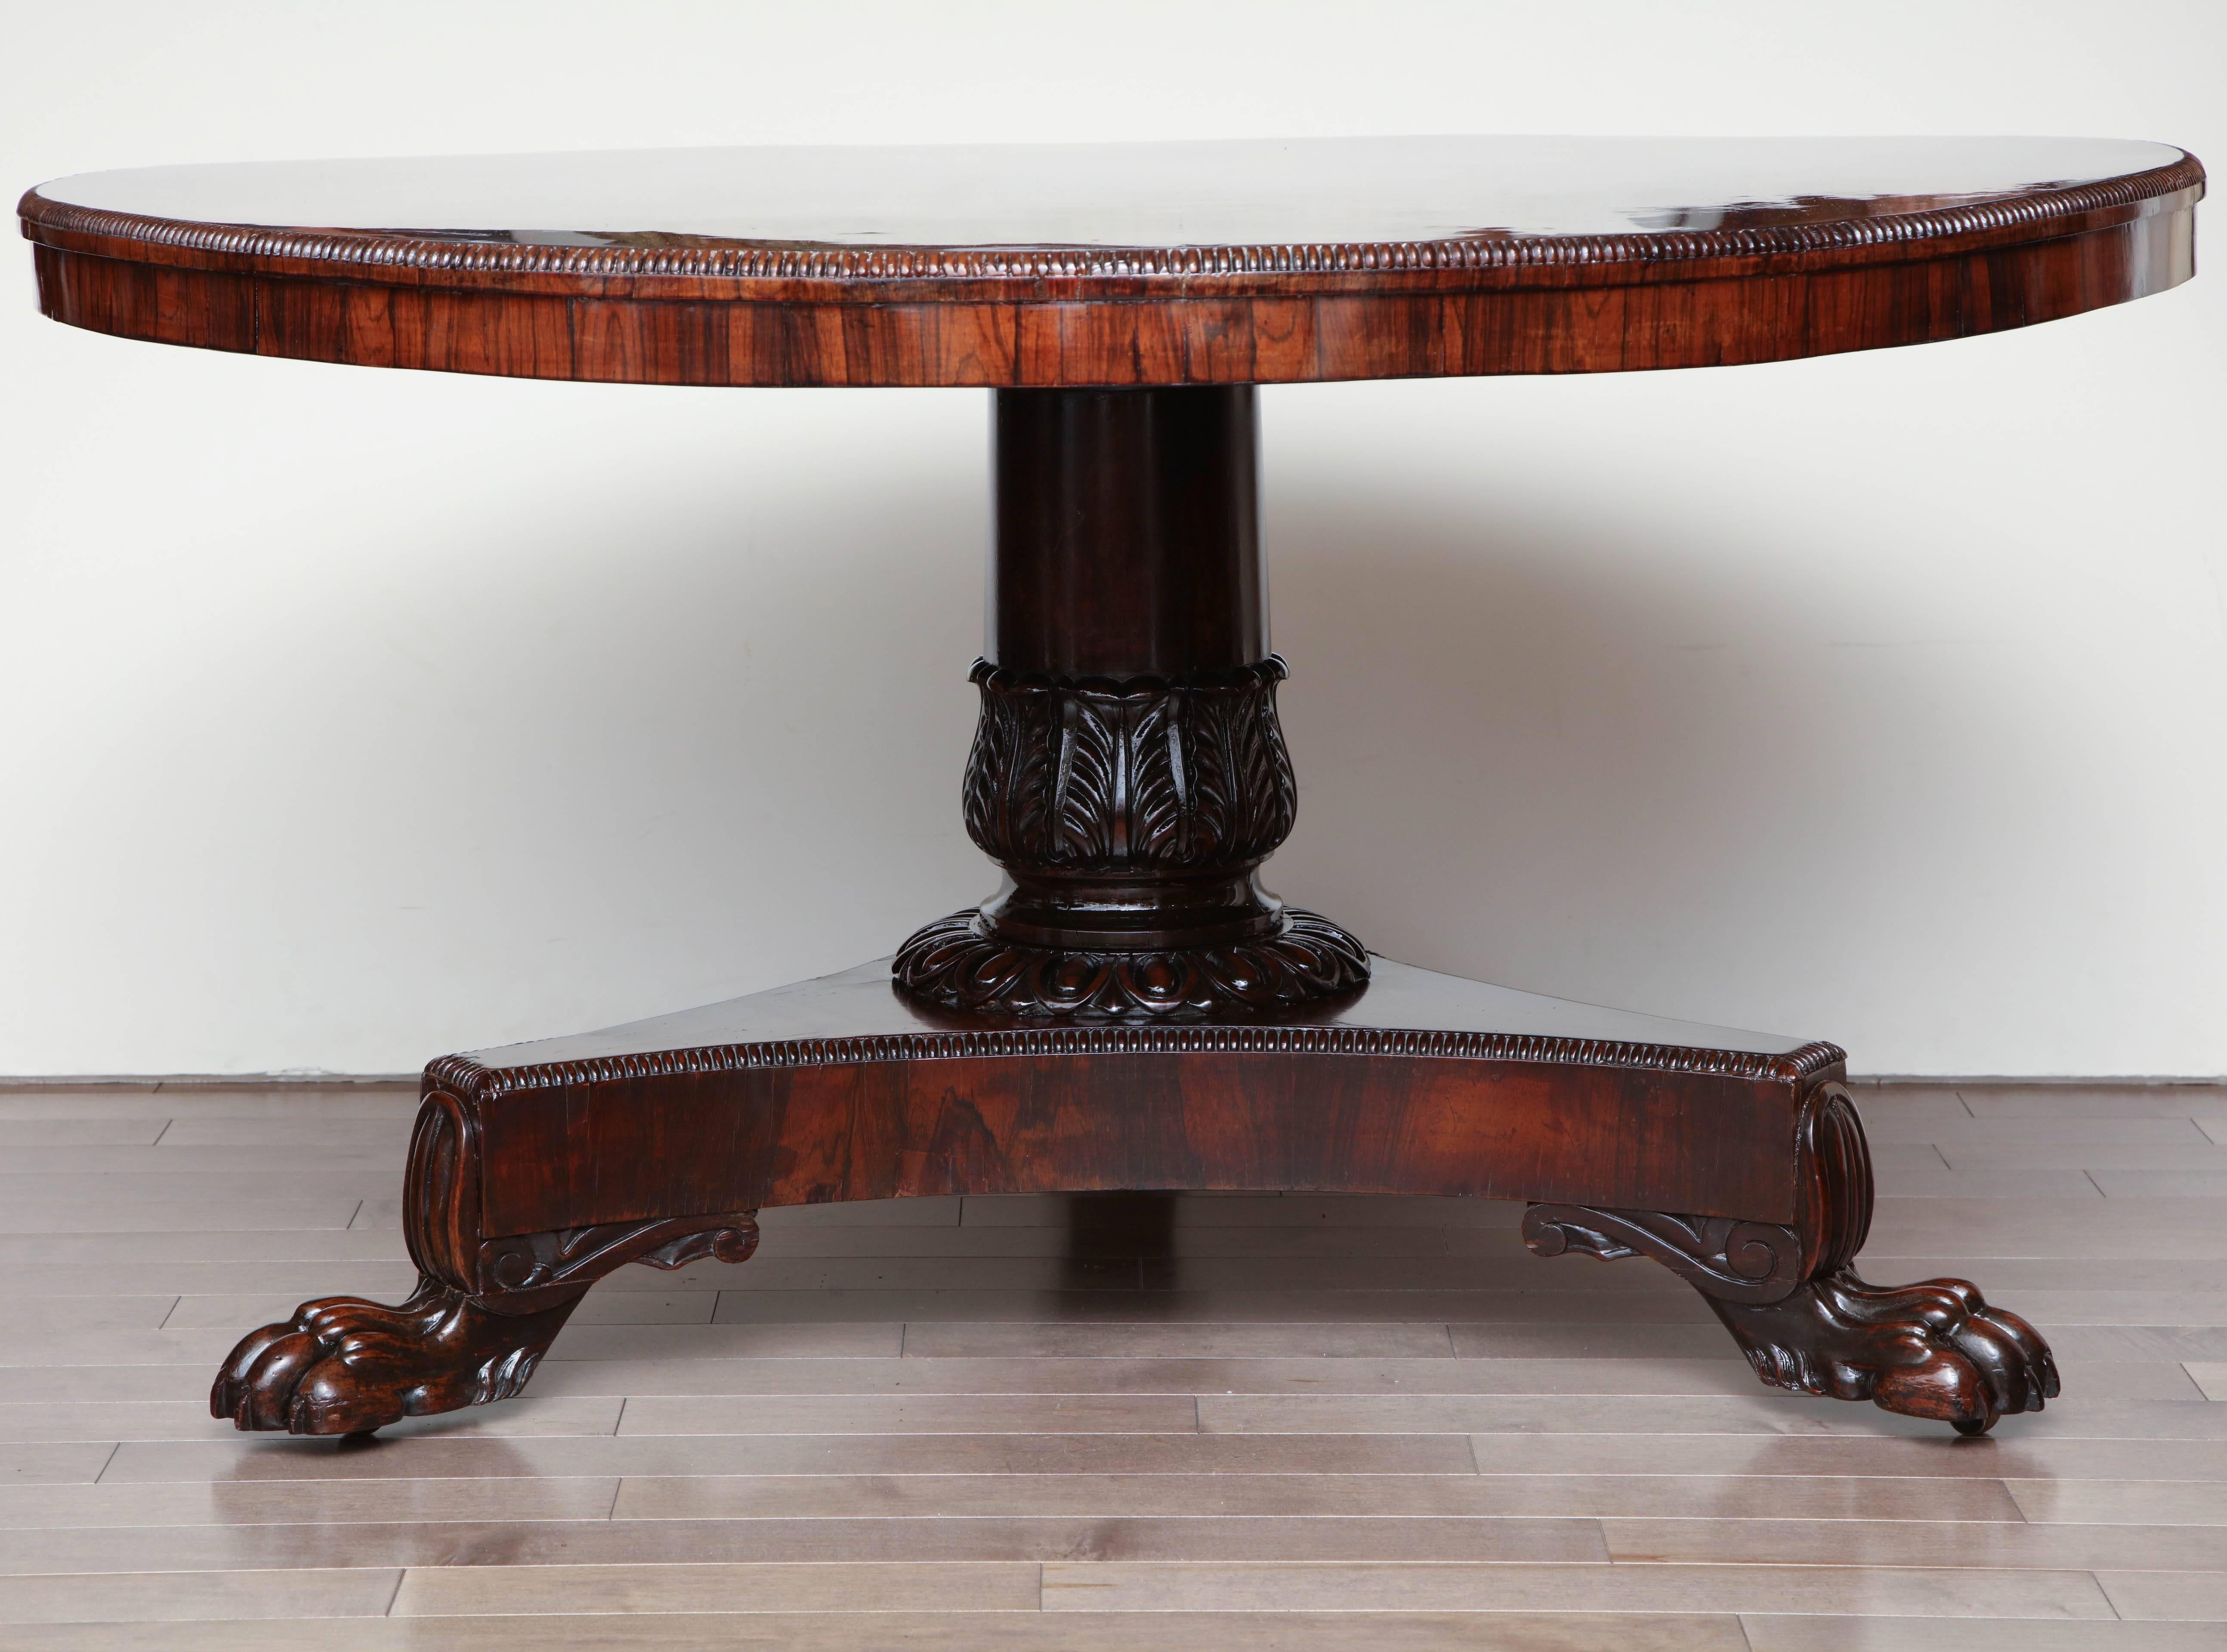 Early 19th century English, single pedestal table in Gonzales Alves.